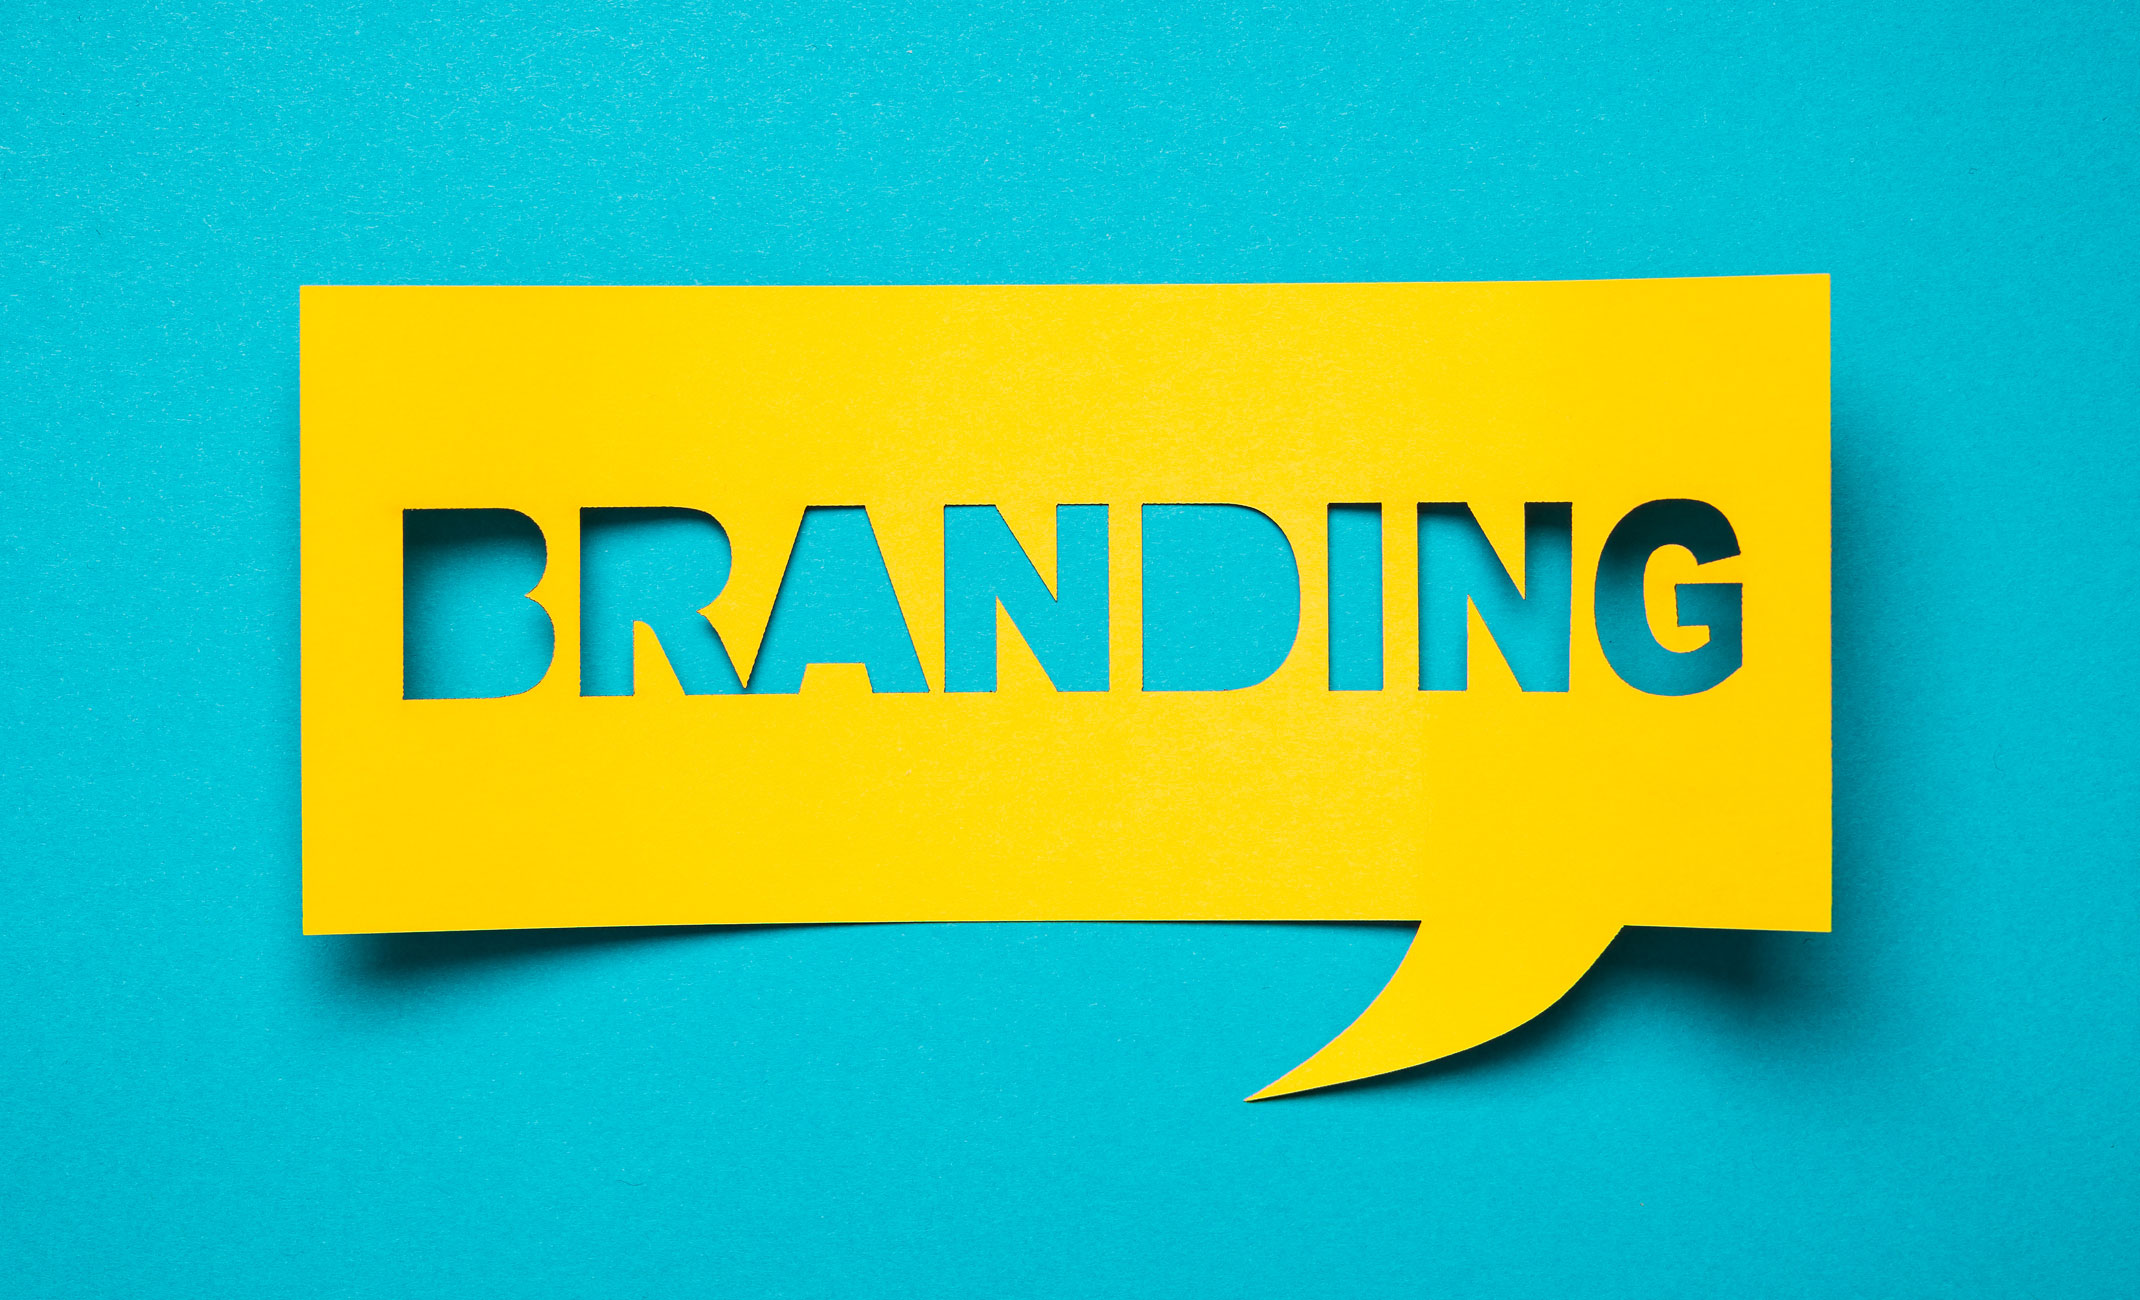 What is online brand management and how to control your image?